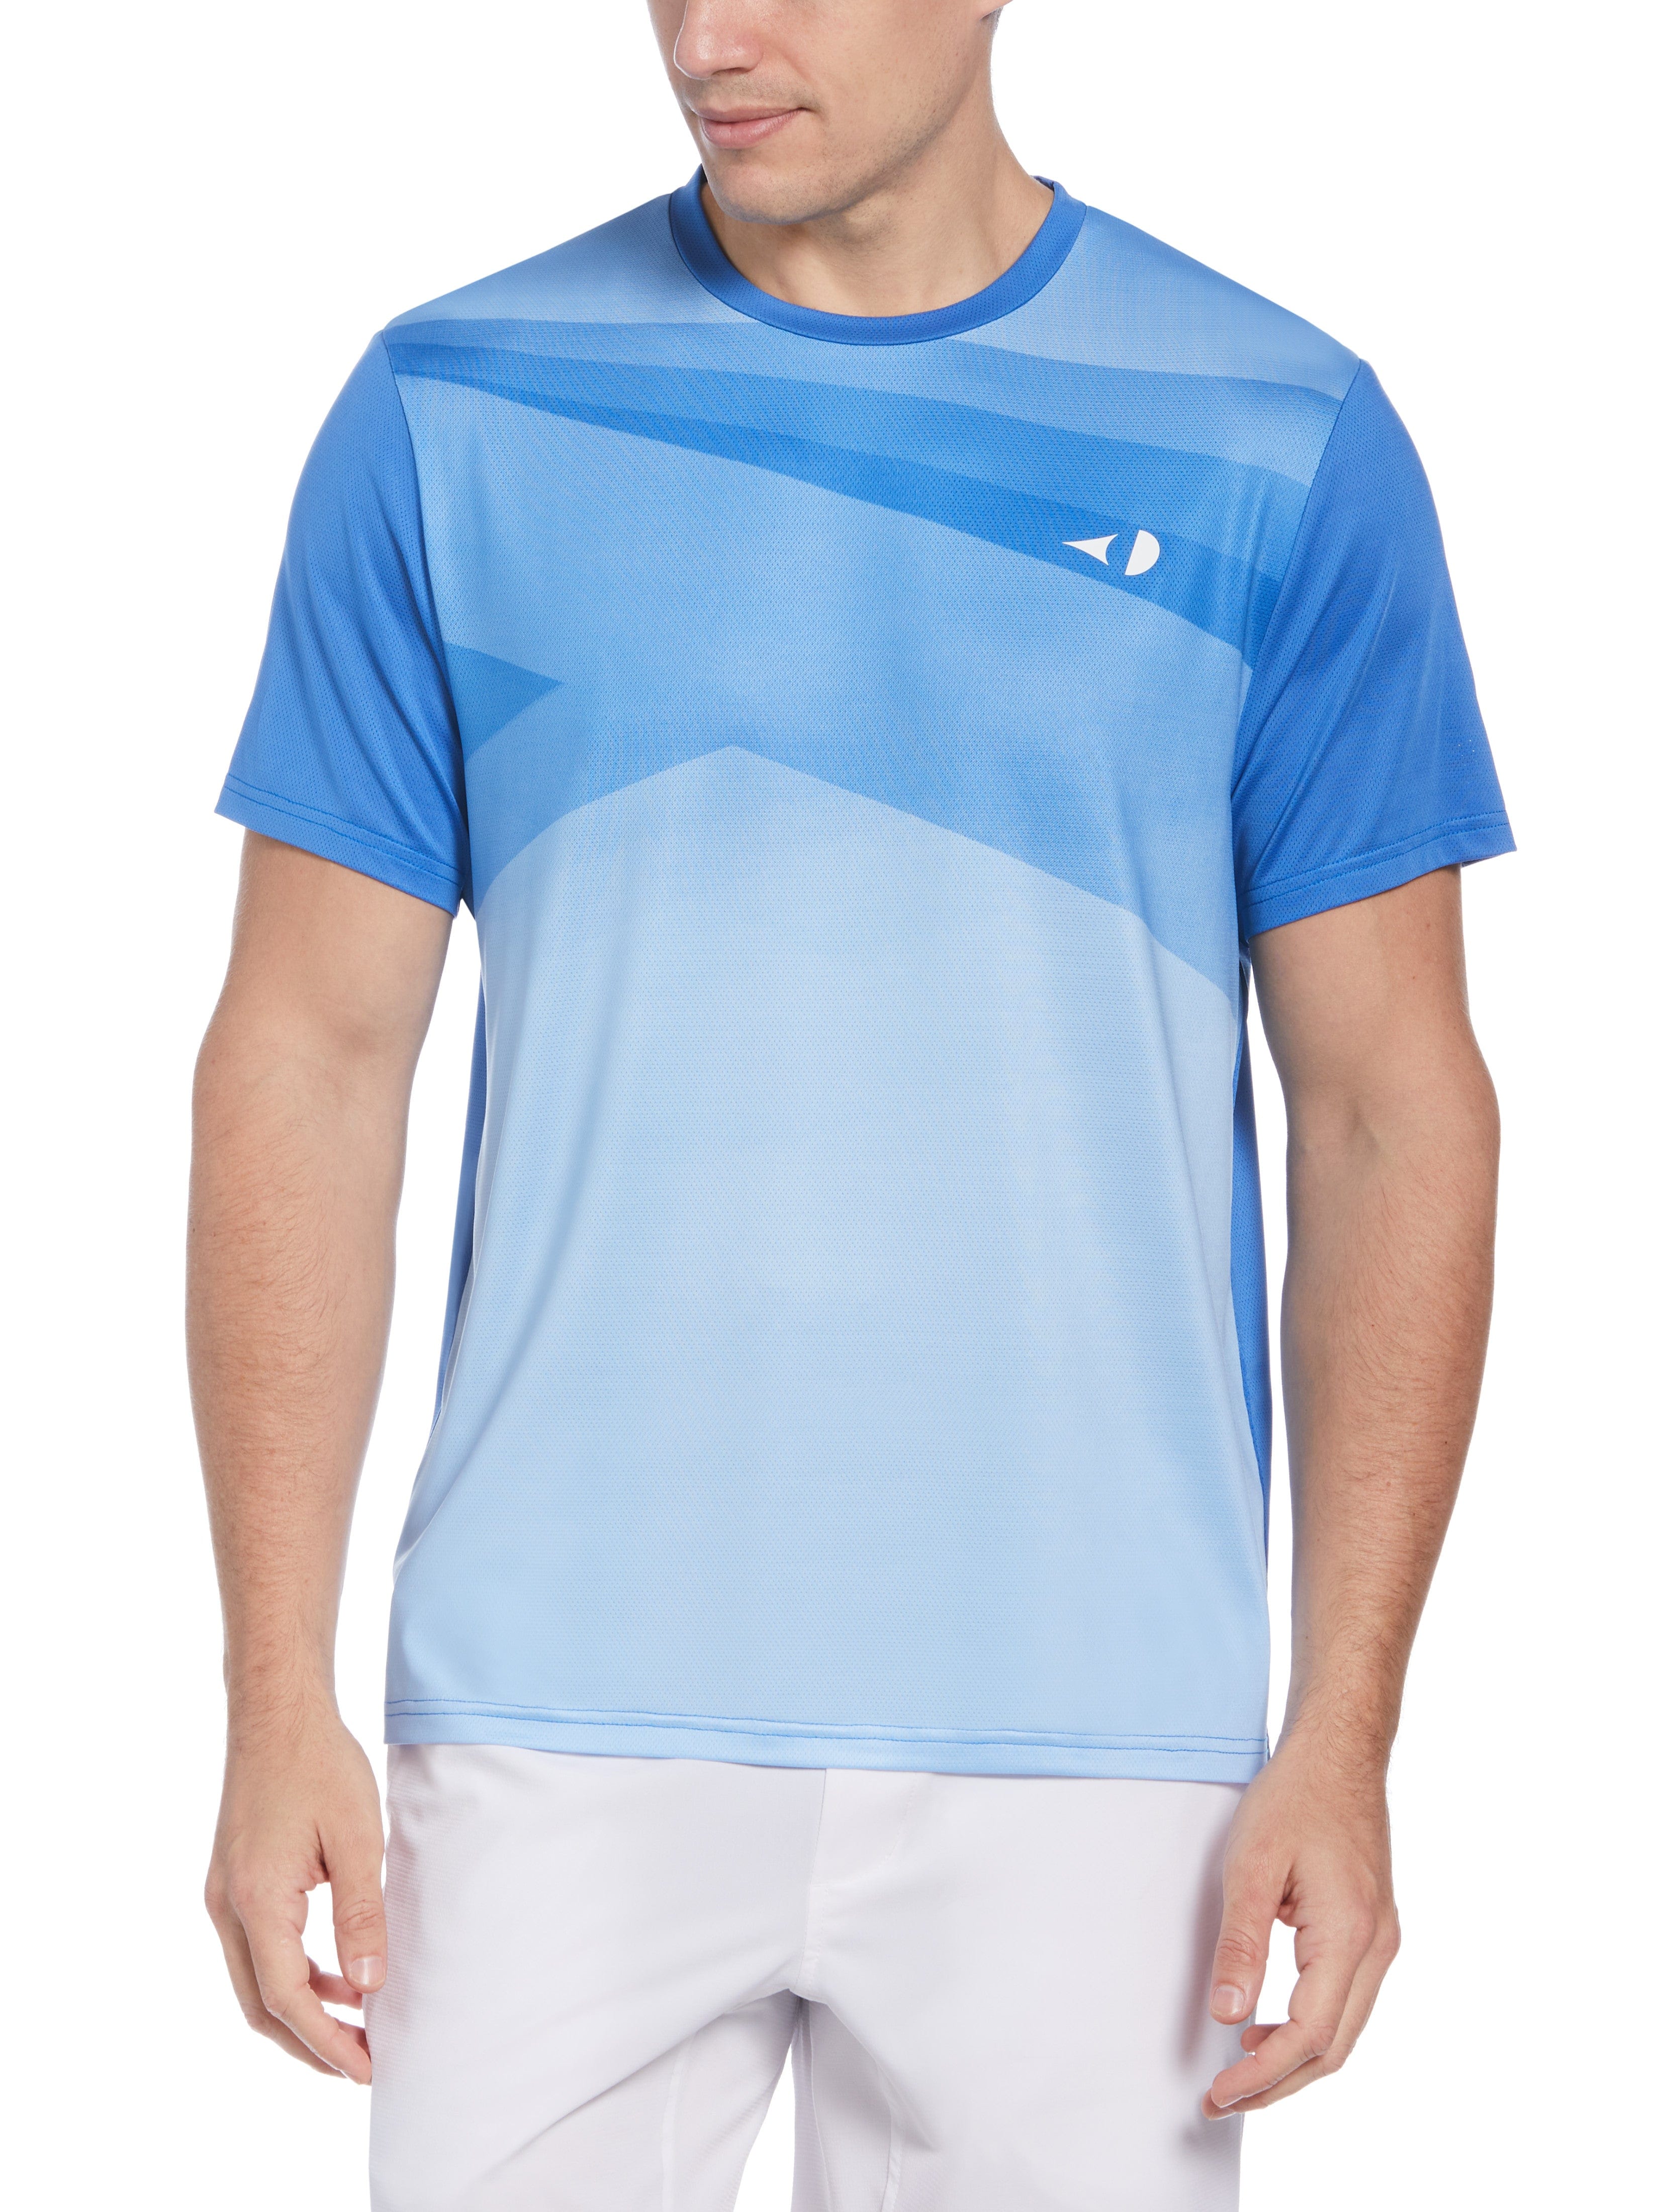 Grand Slam Mens Asymetrical Texture Printed Tennis T-Shirt, Size Large, Egyptian Blue, Polyester/Spandex | Golf Apparel Shop